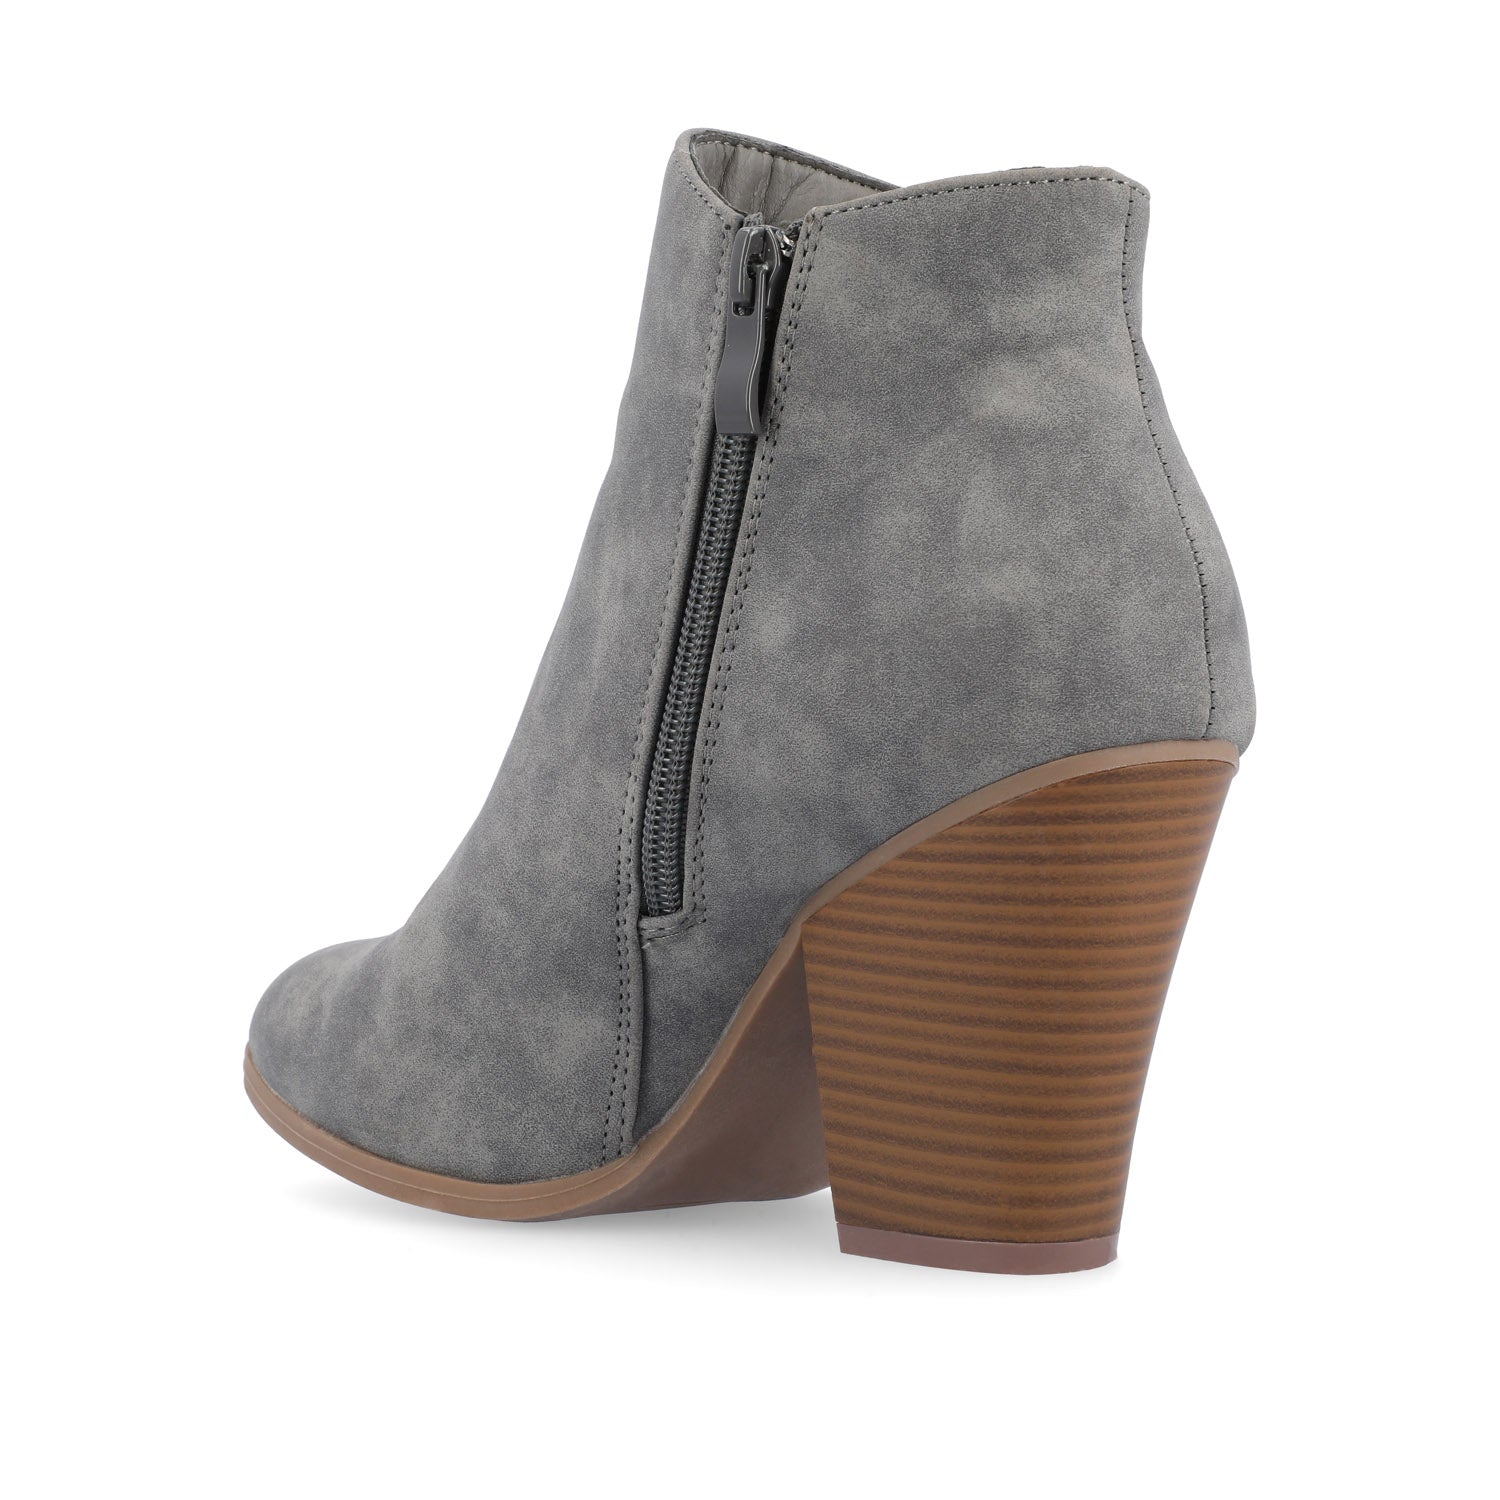 VALLY ZIP-UP BOOTIES IN FAUX LEATHER